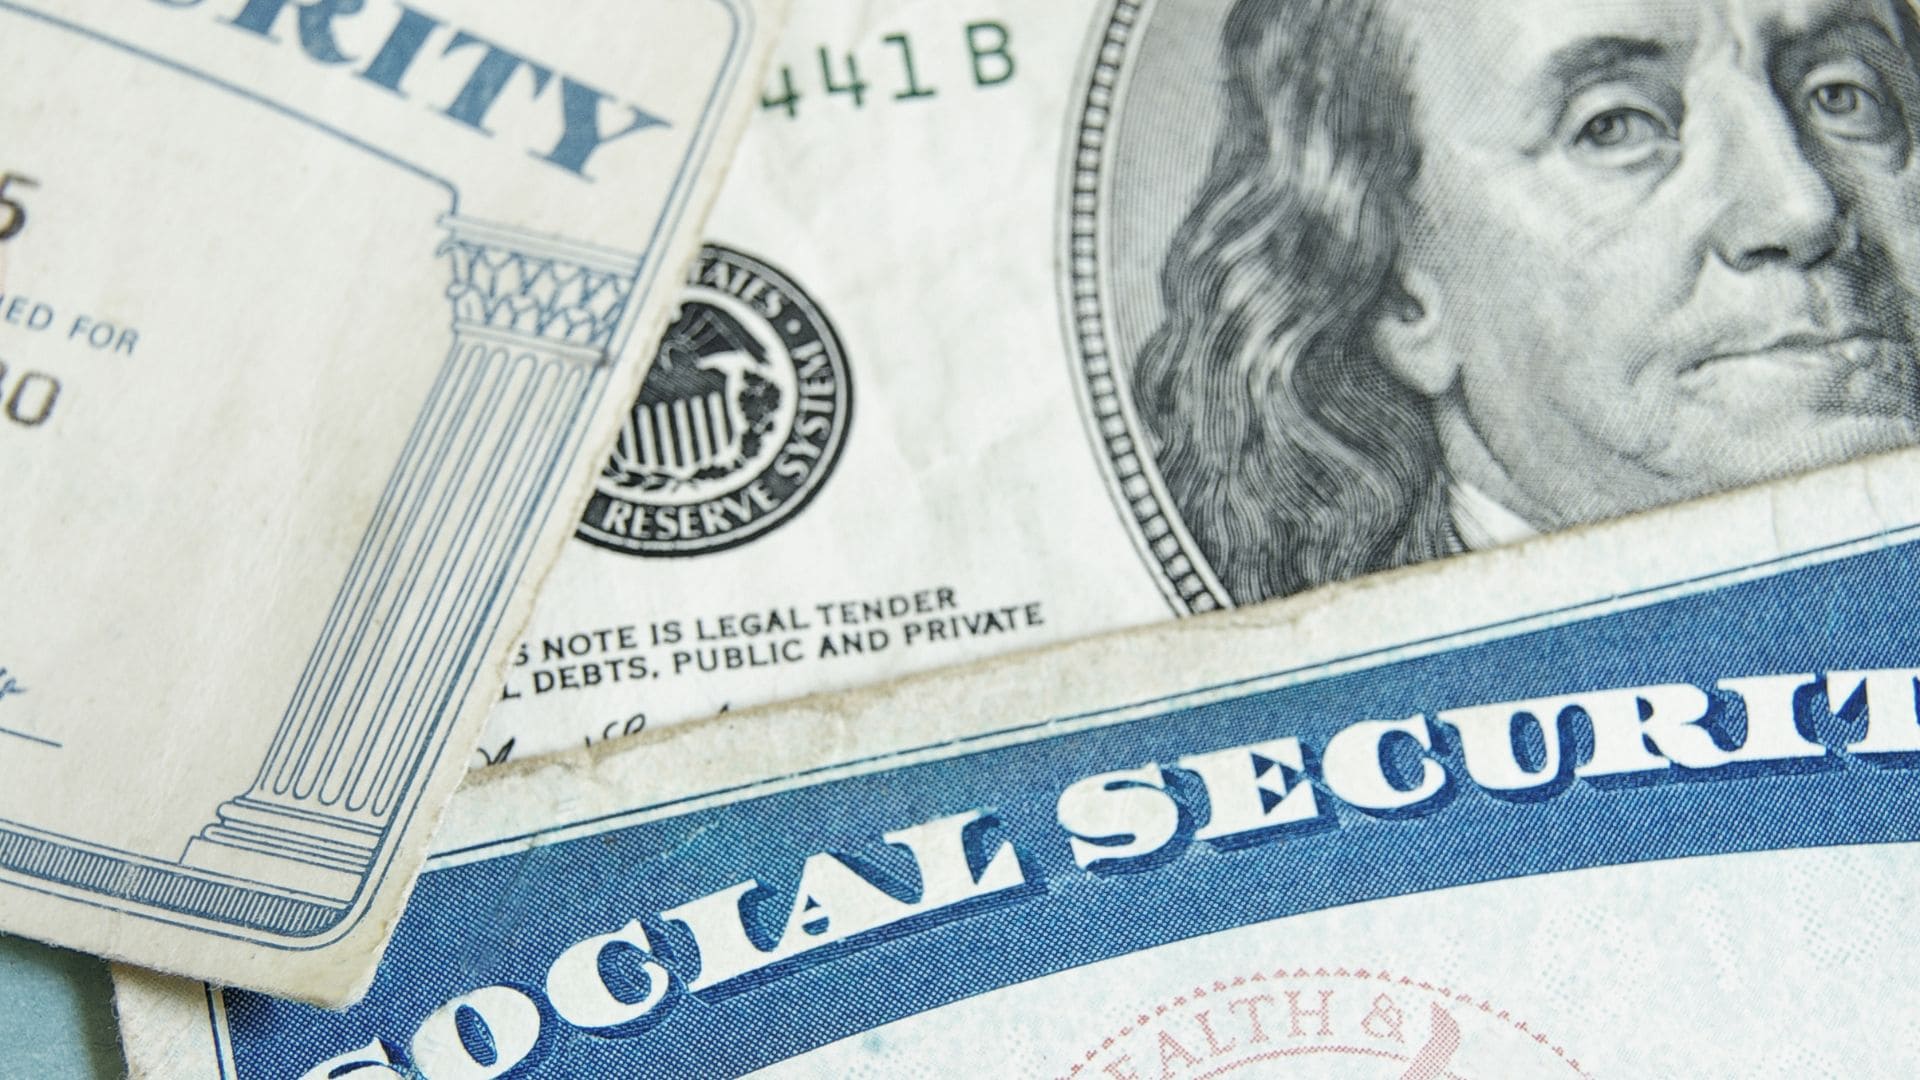 Americans will not get a Supplemental Security Income if they are in this group